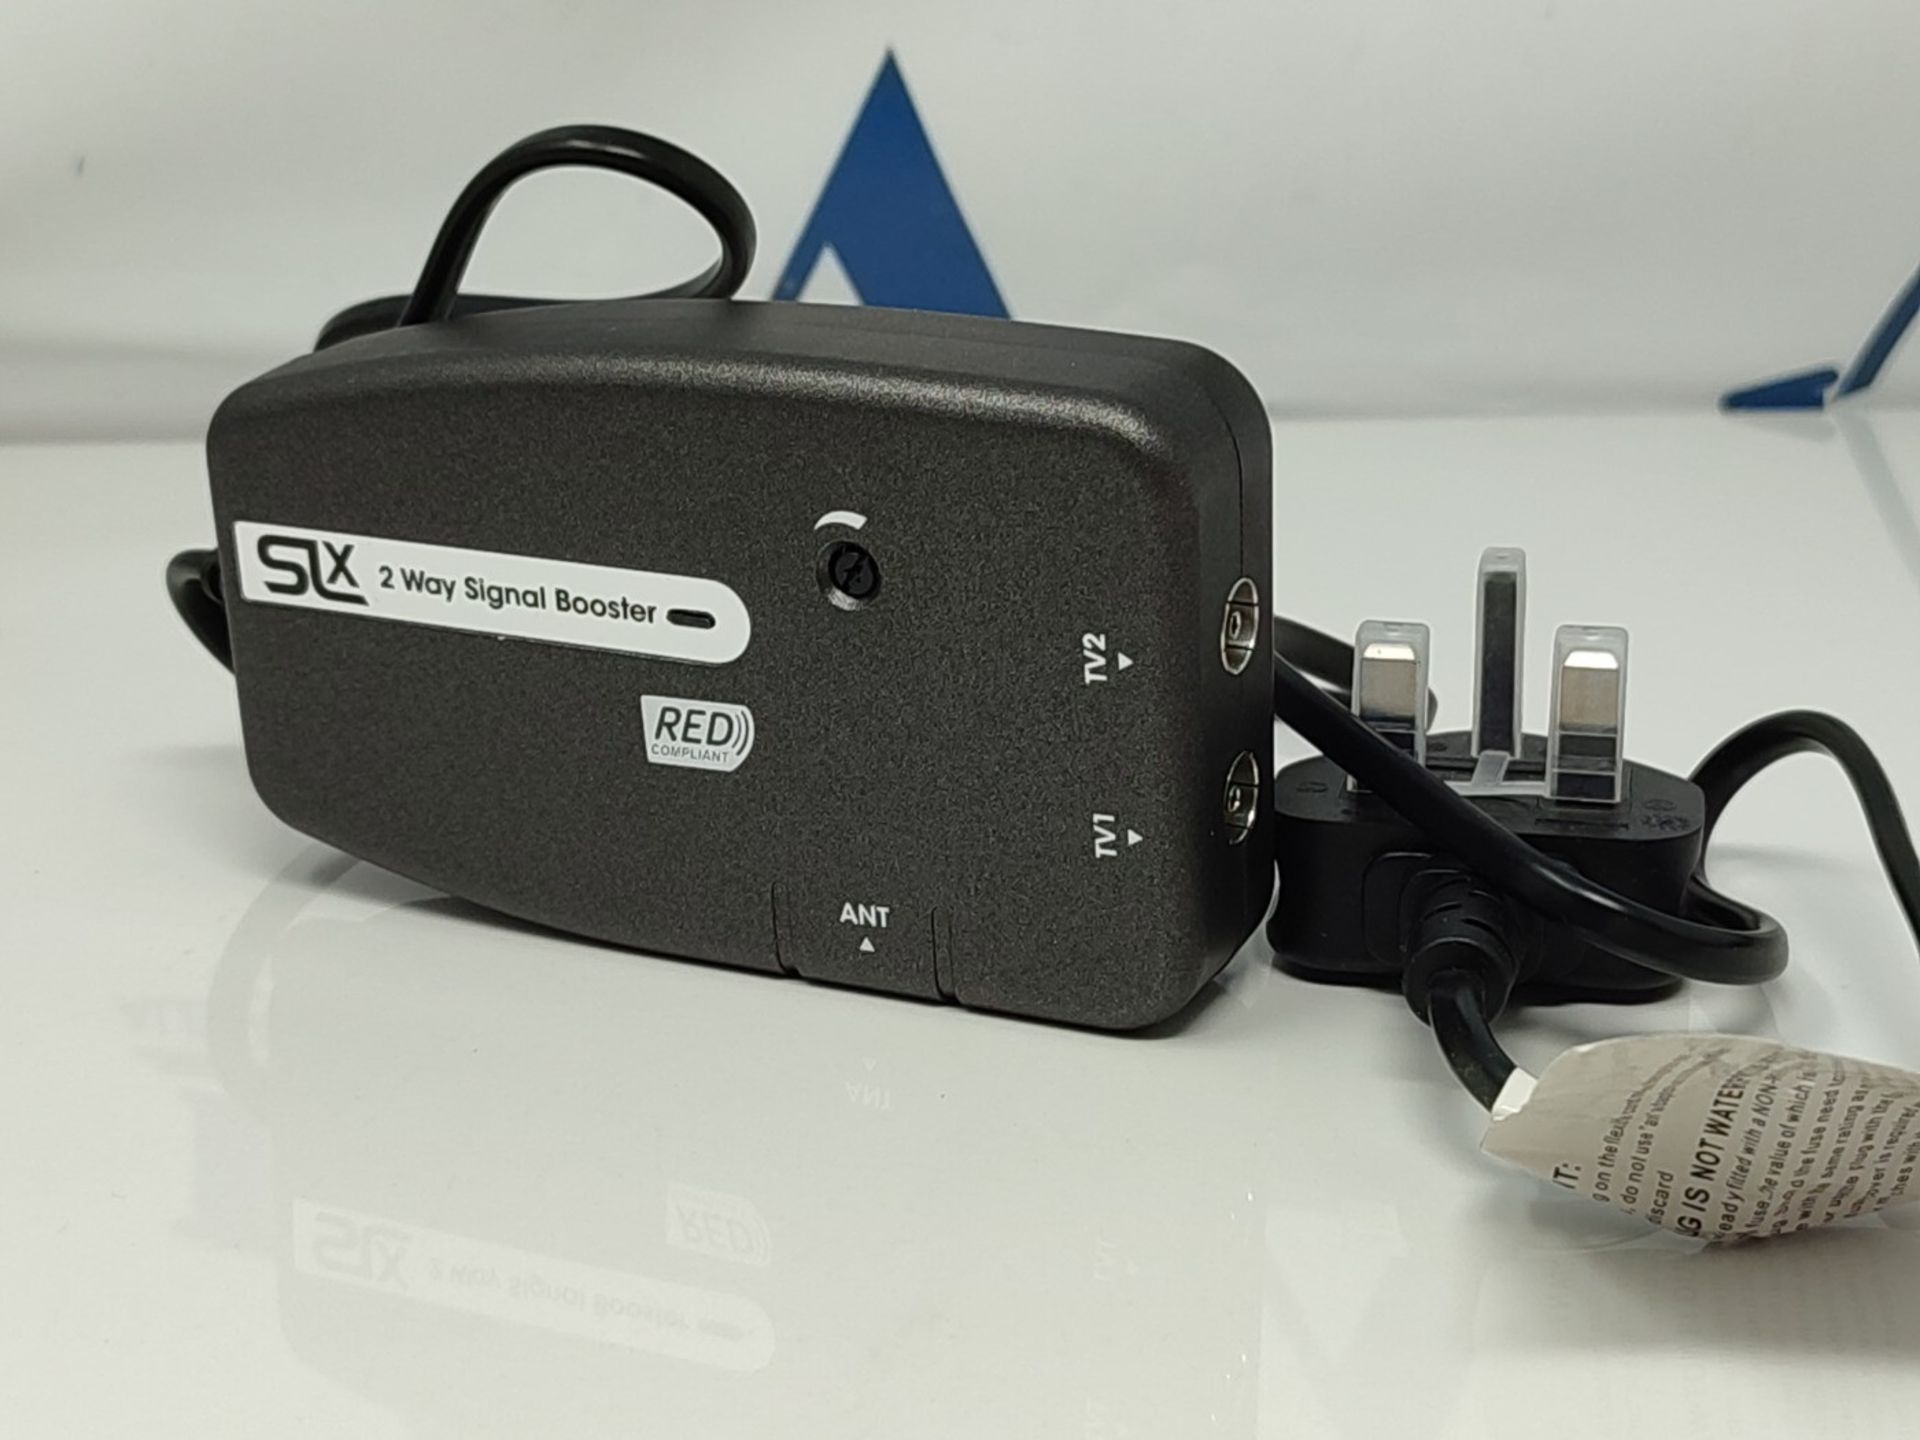 SLx TV Signal Booster Aerial Amplifier, 2 Way Signal Distribution Amplifier with Coax - Image 2 of 2